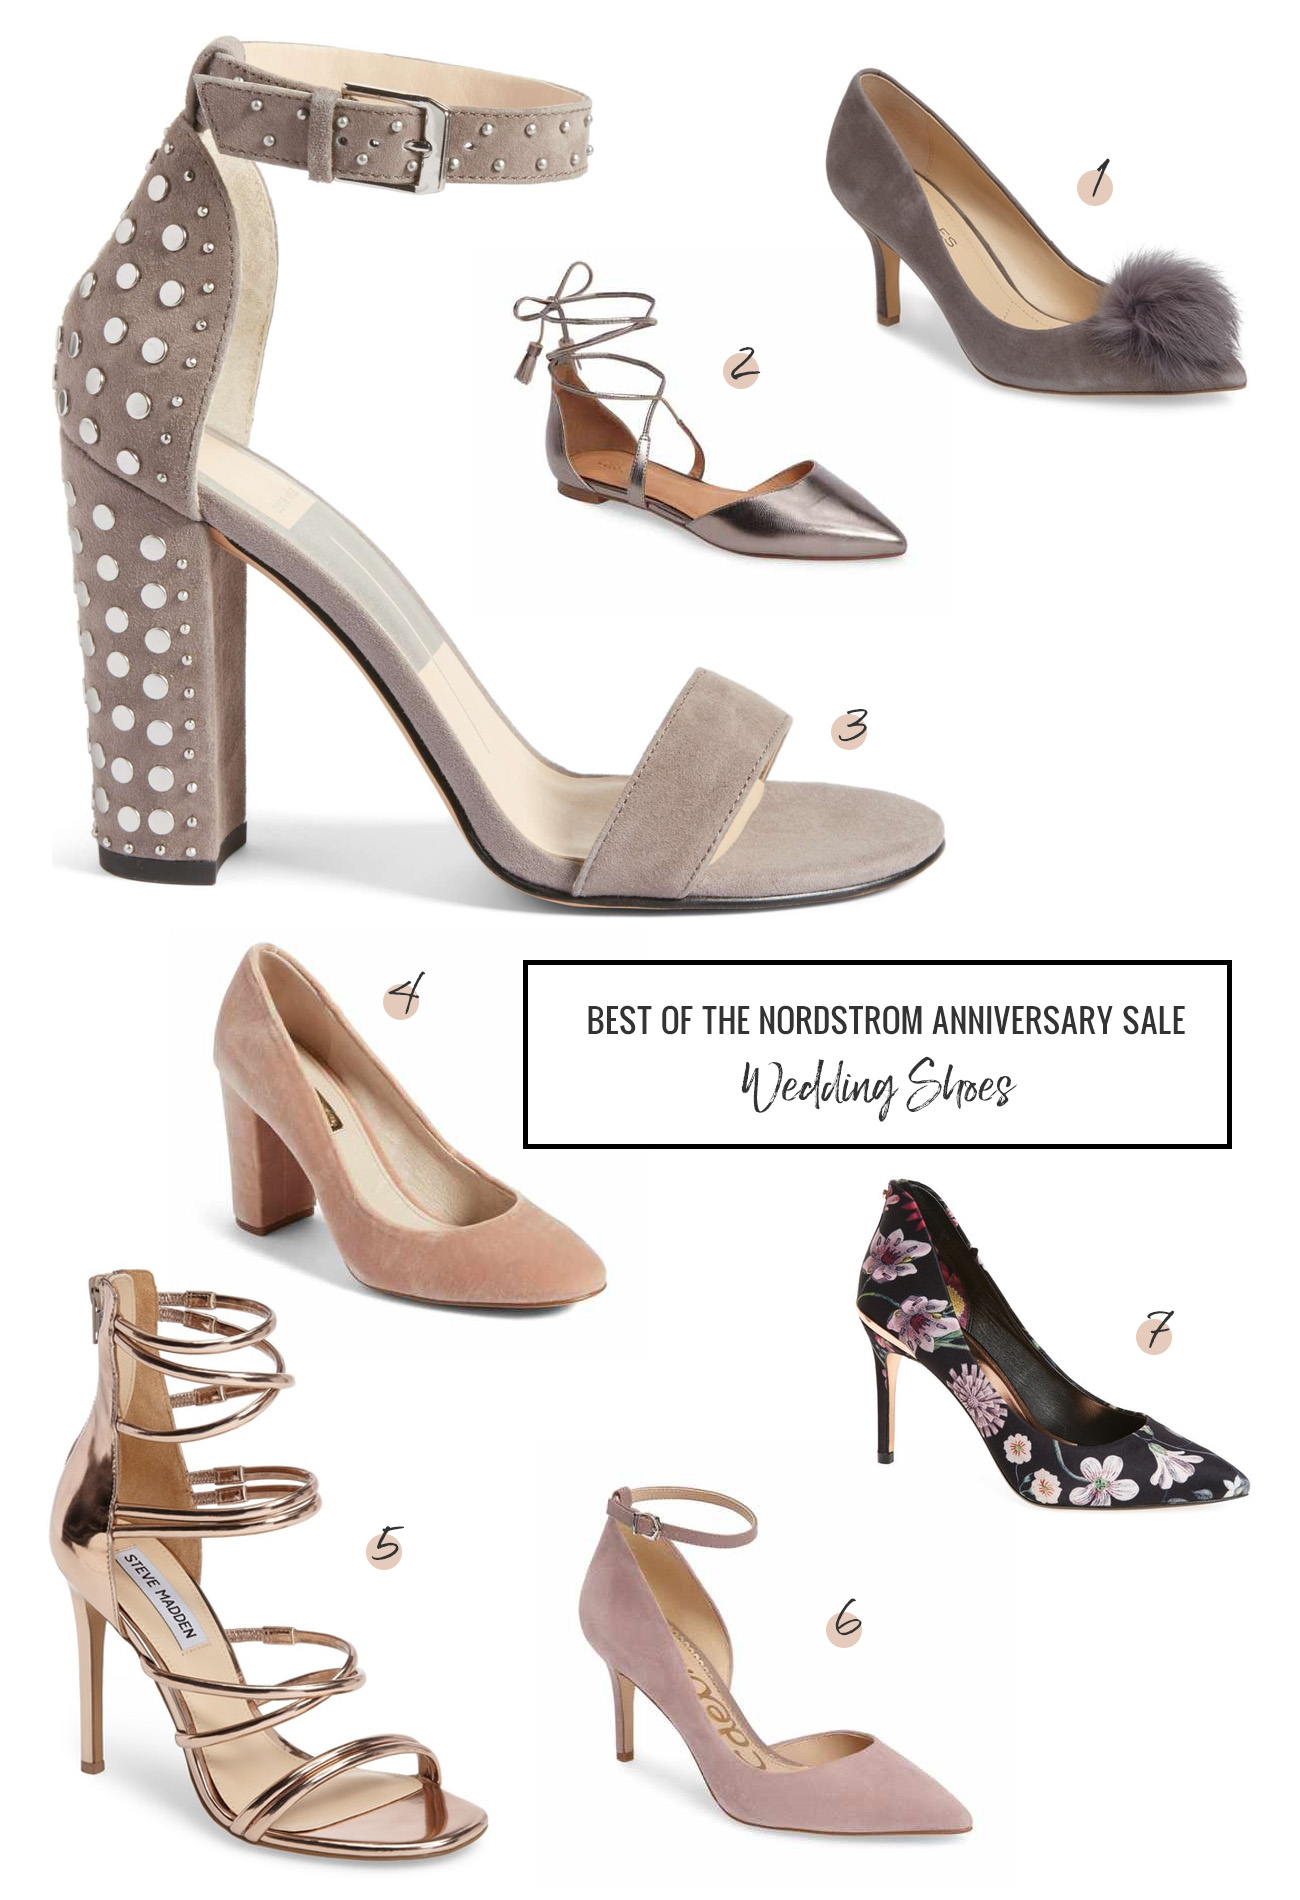 Nordstrom Anniversary Sale ? Our Shoe Picks!